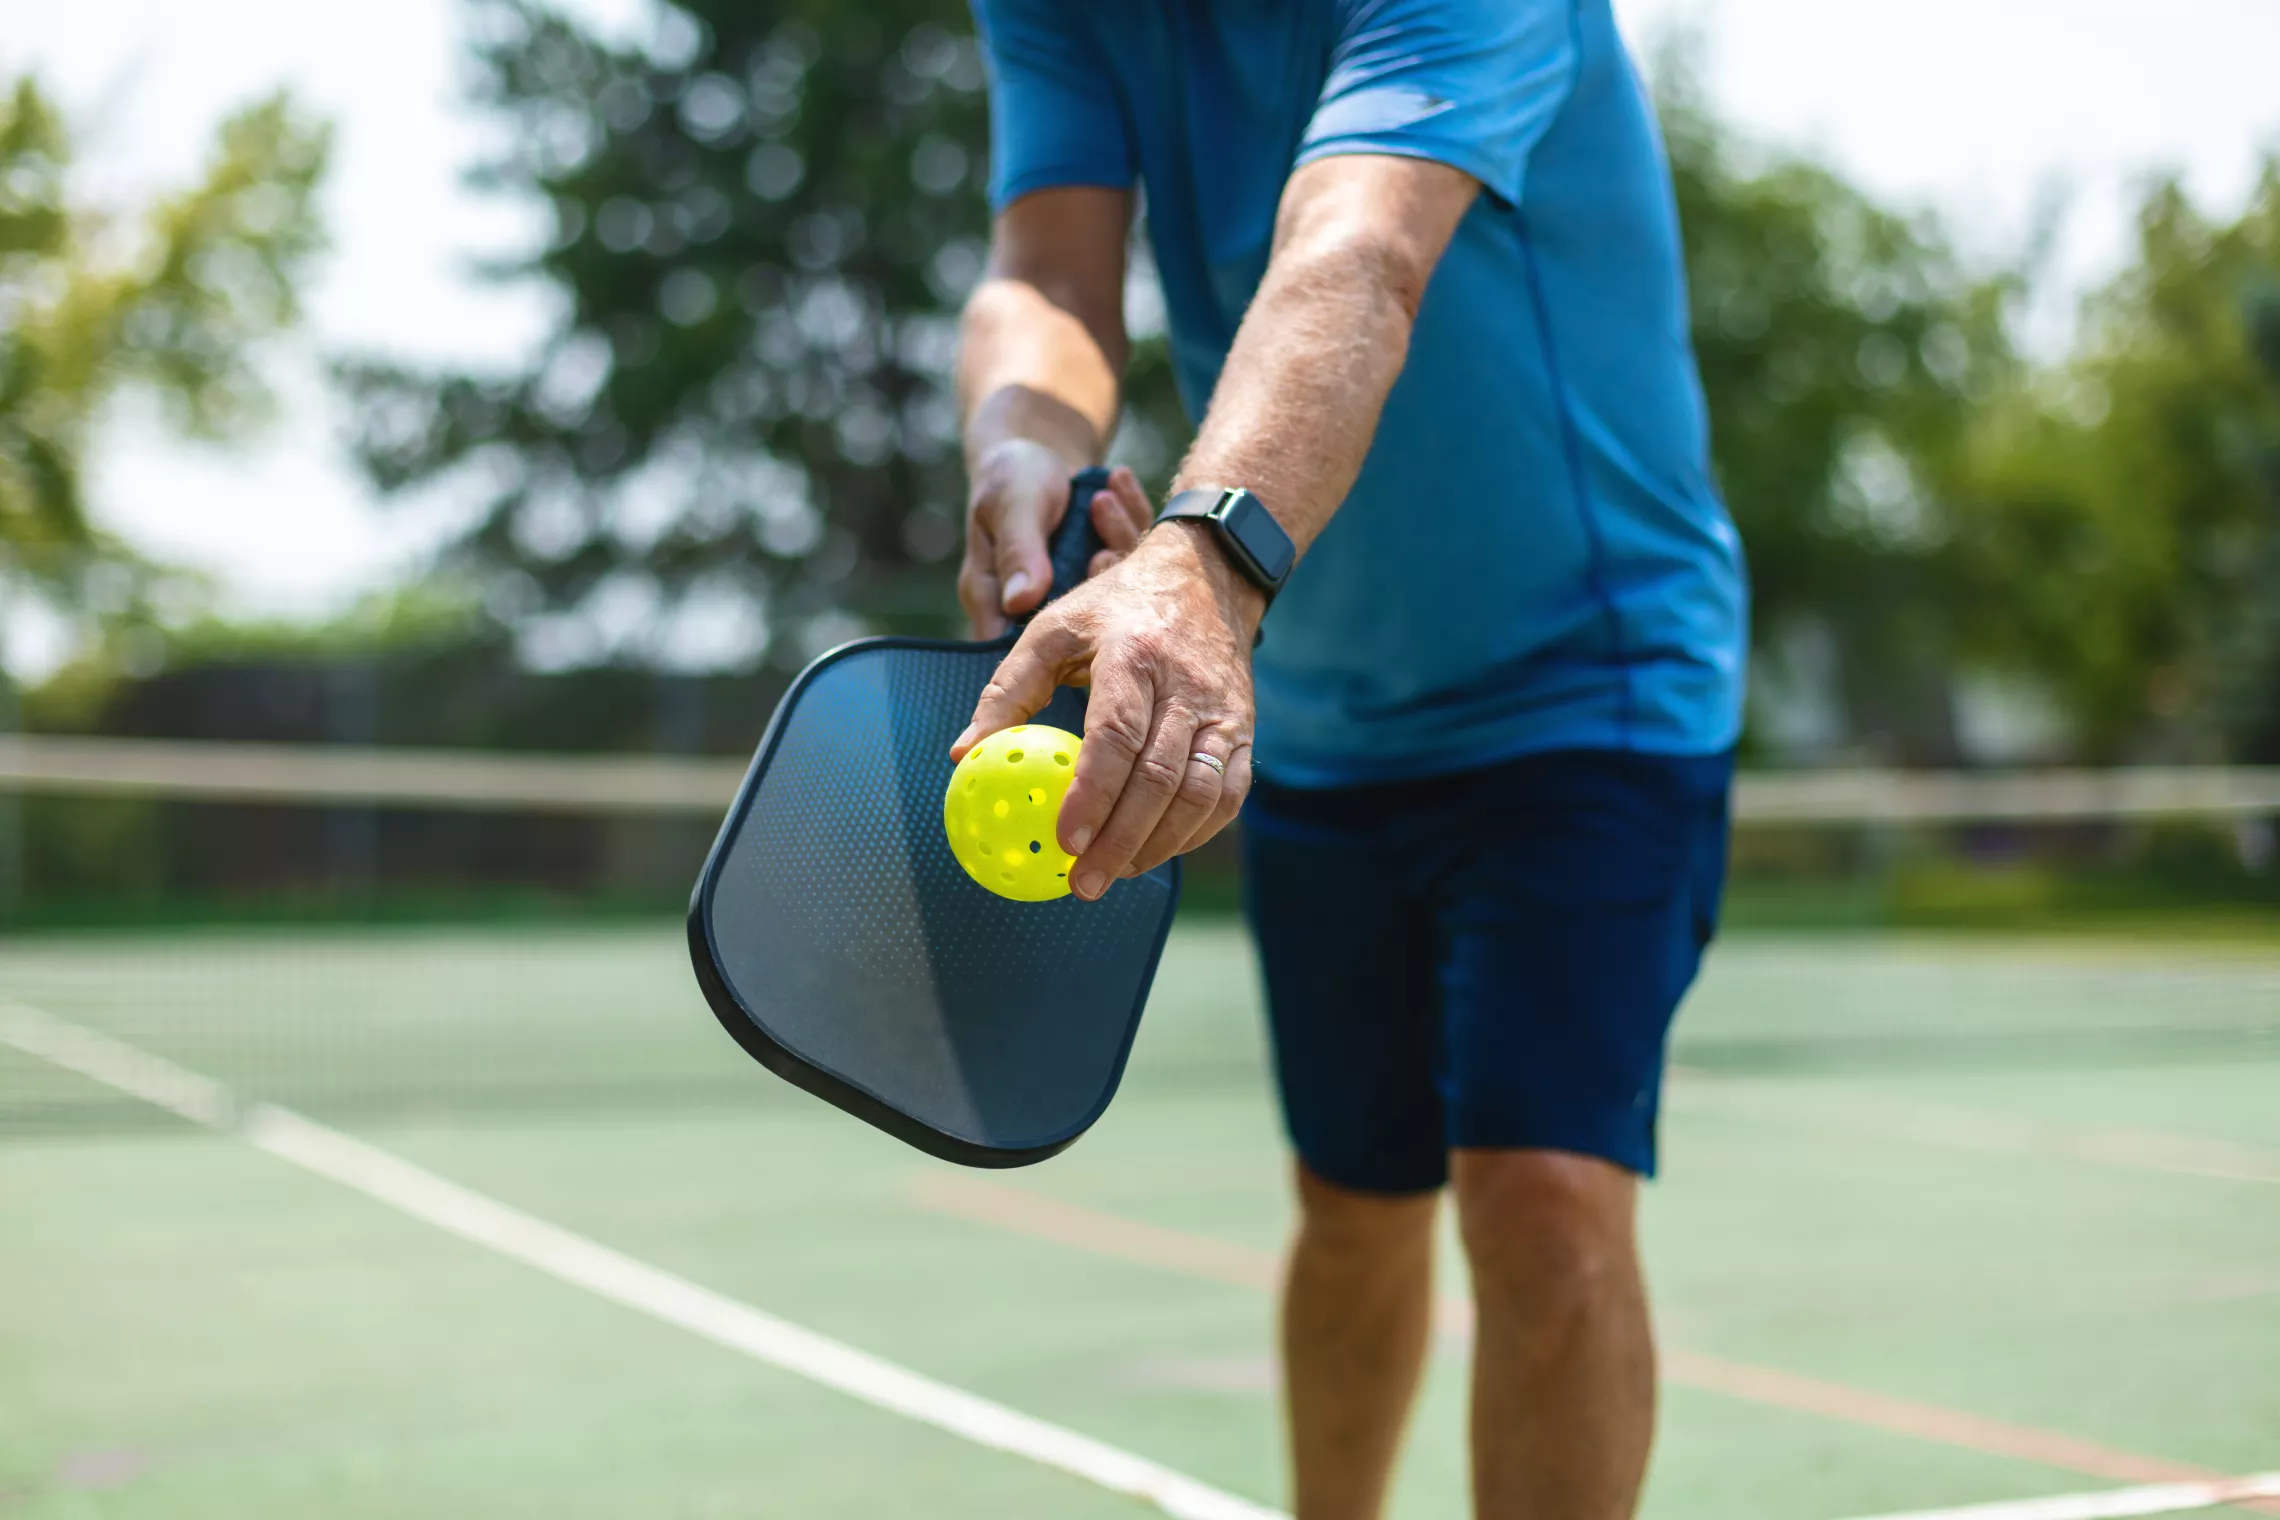 Mature White Adult In Position For Serve During Outdoor Pickleball 